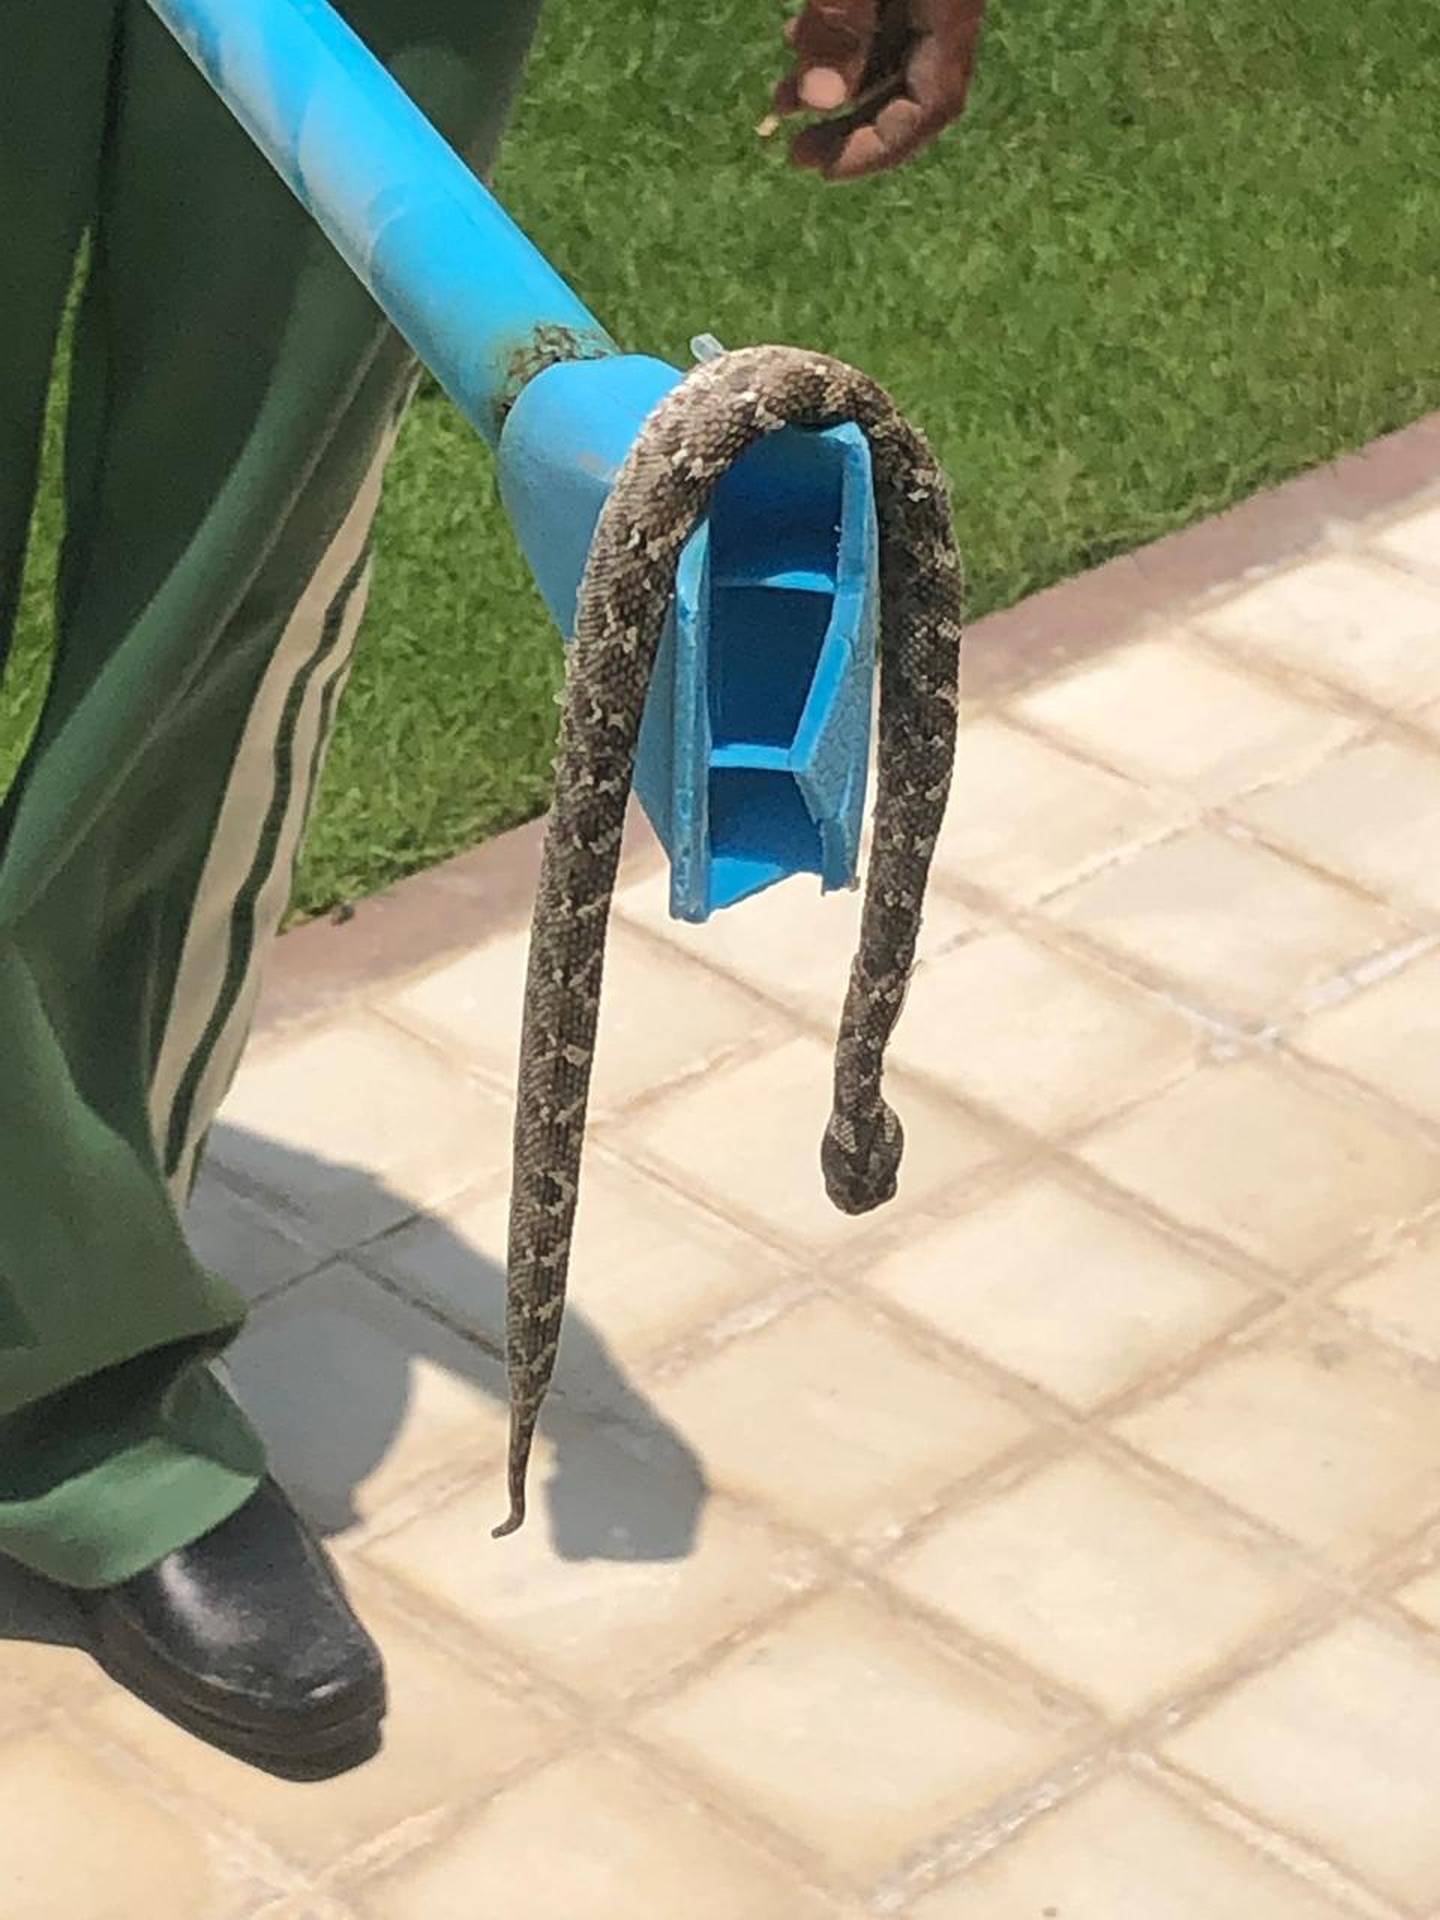 With no external wall or boundary, desert snakes are being found in homes and gardens. Courtesy: Jamal Guergour